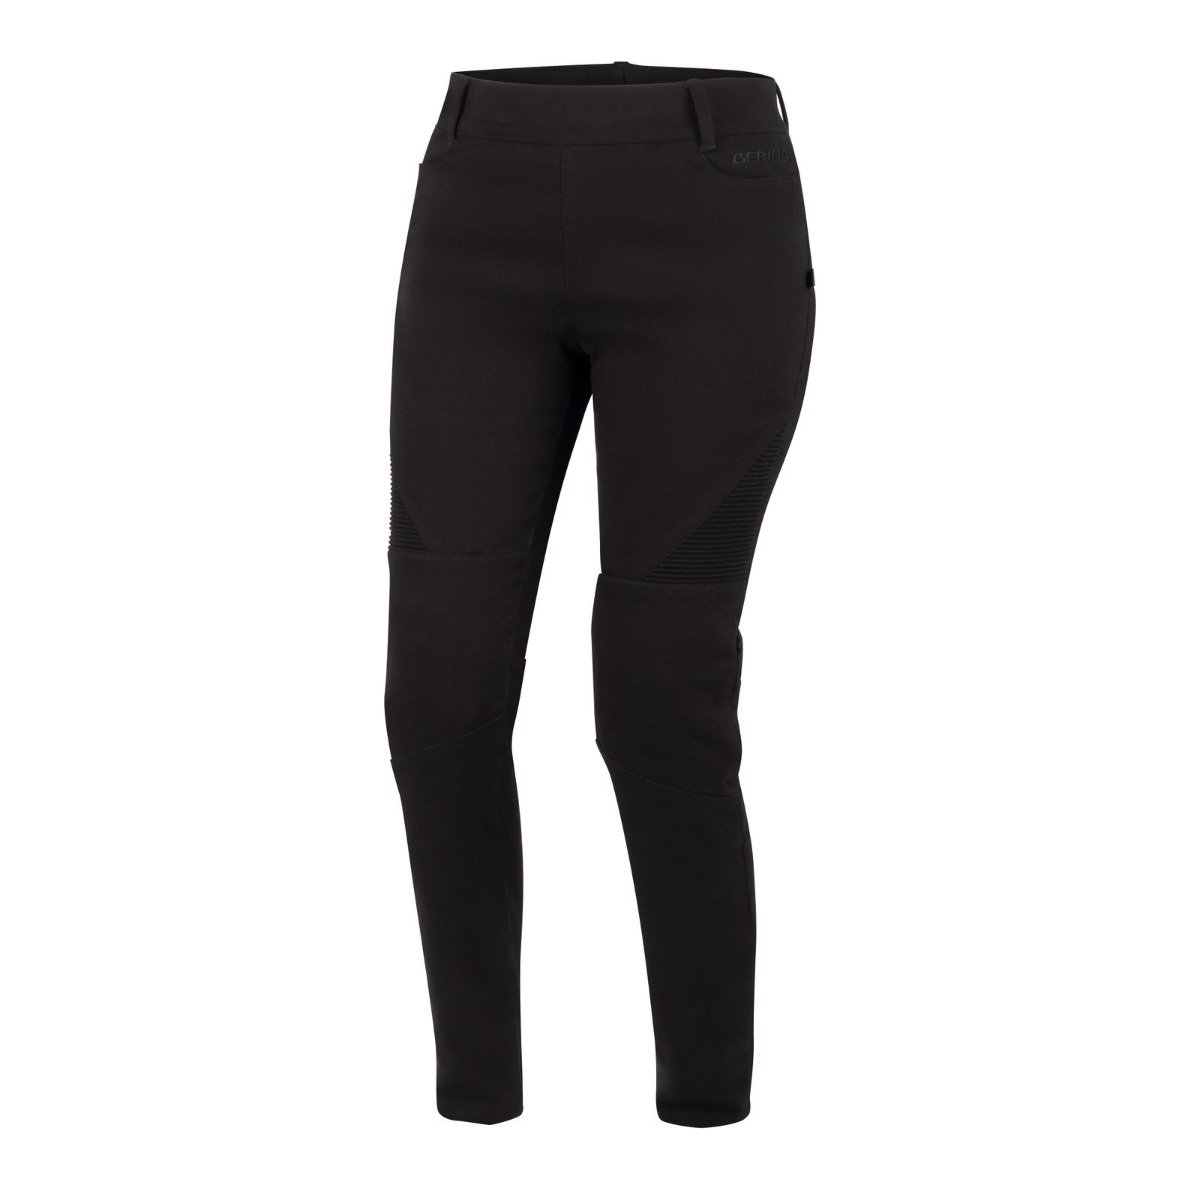 Image of Bering Peggy Black Lady Pants Size T5 ID 3660815153468